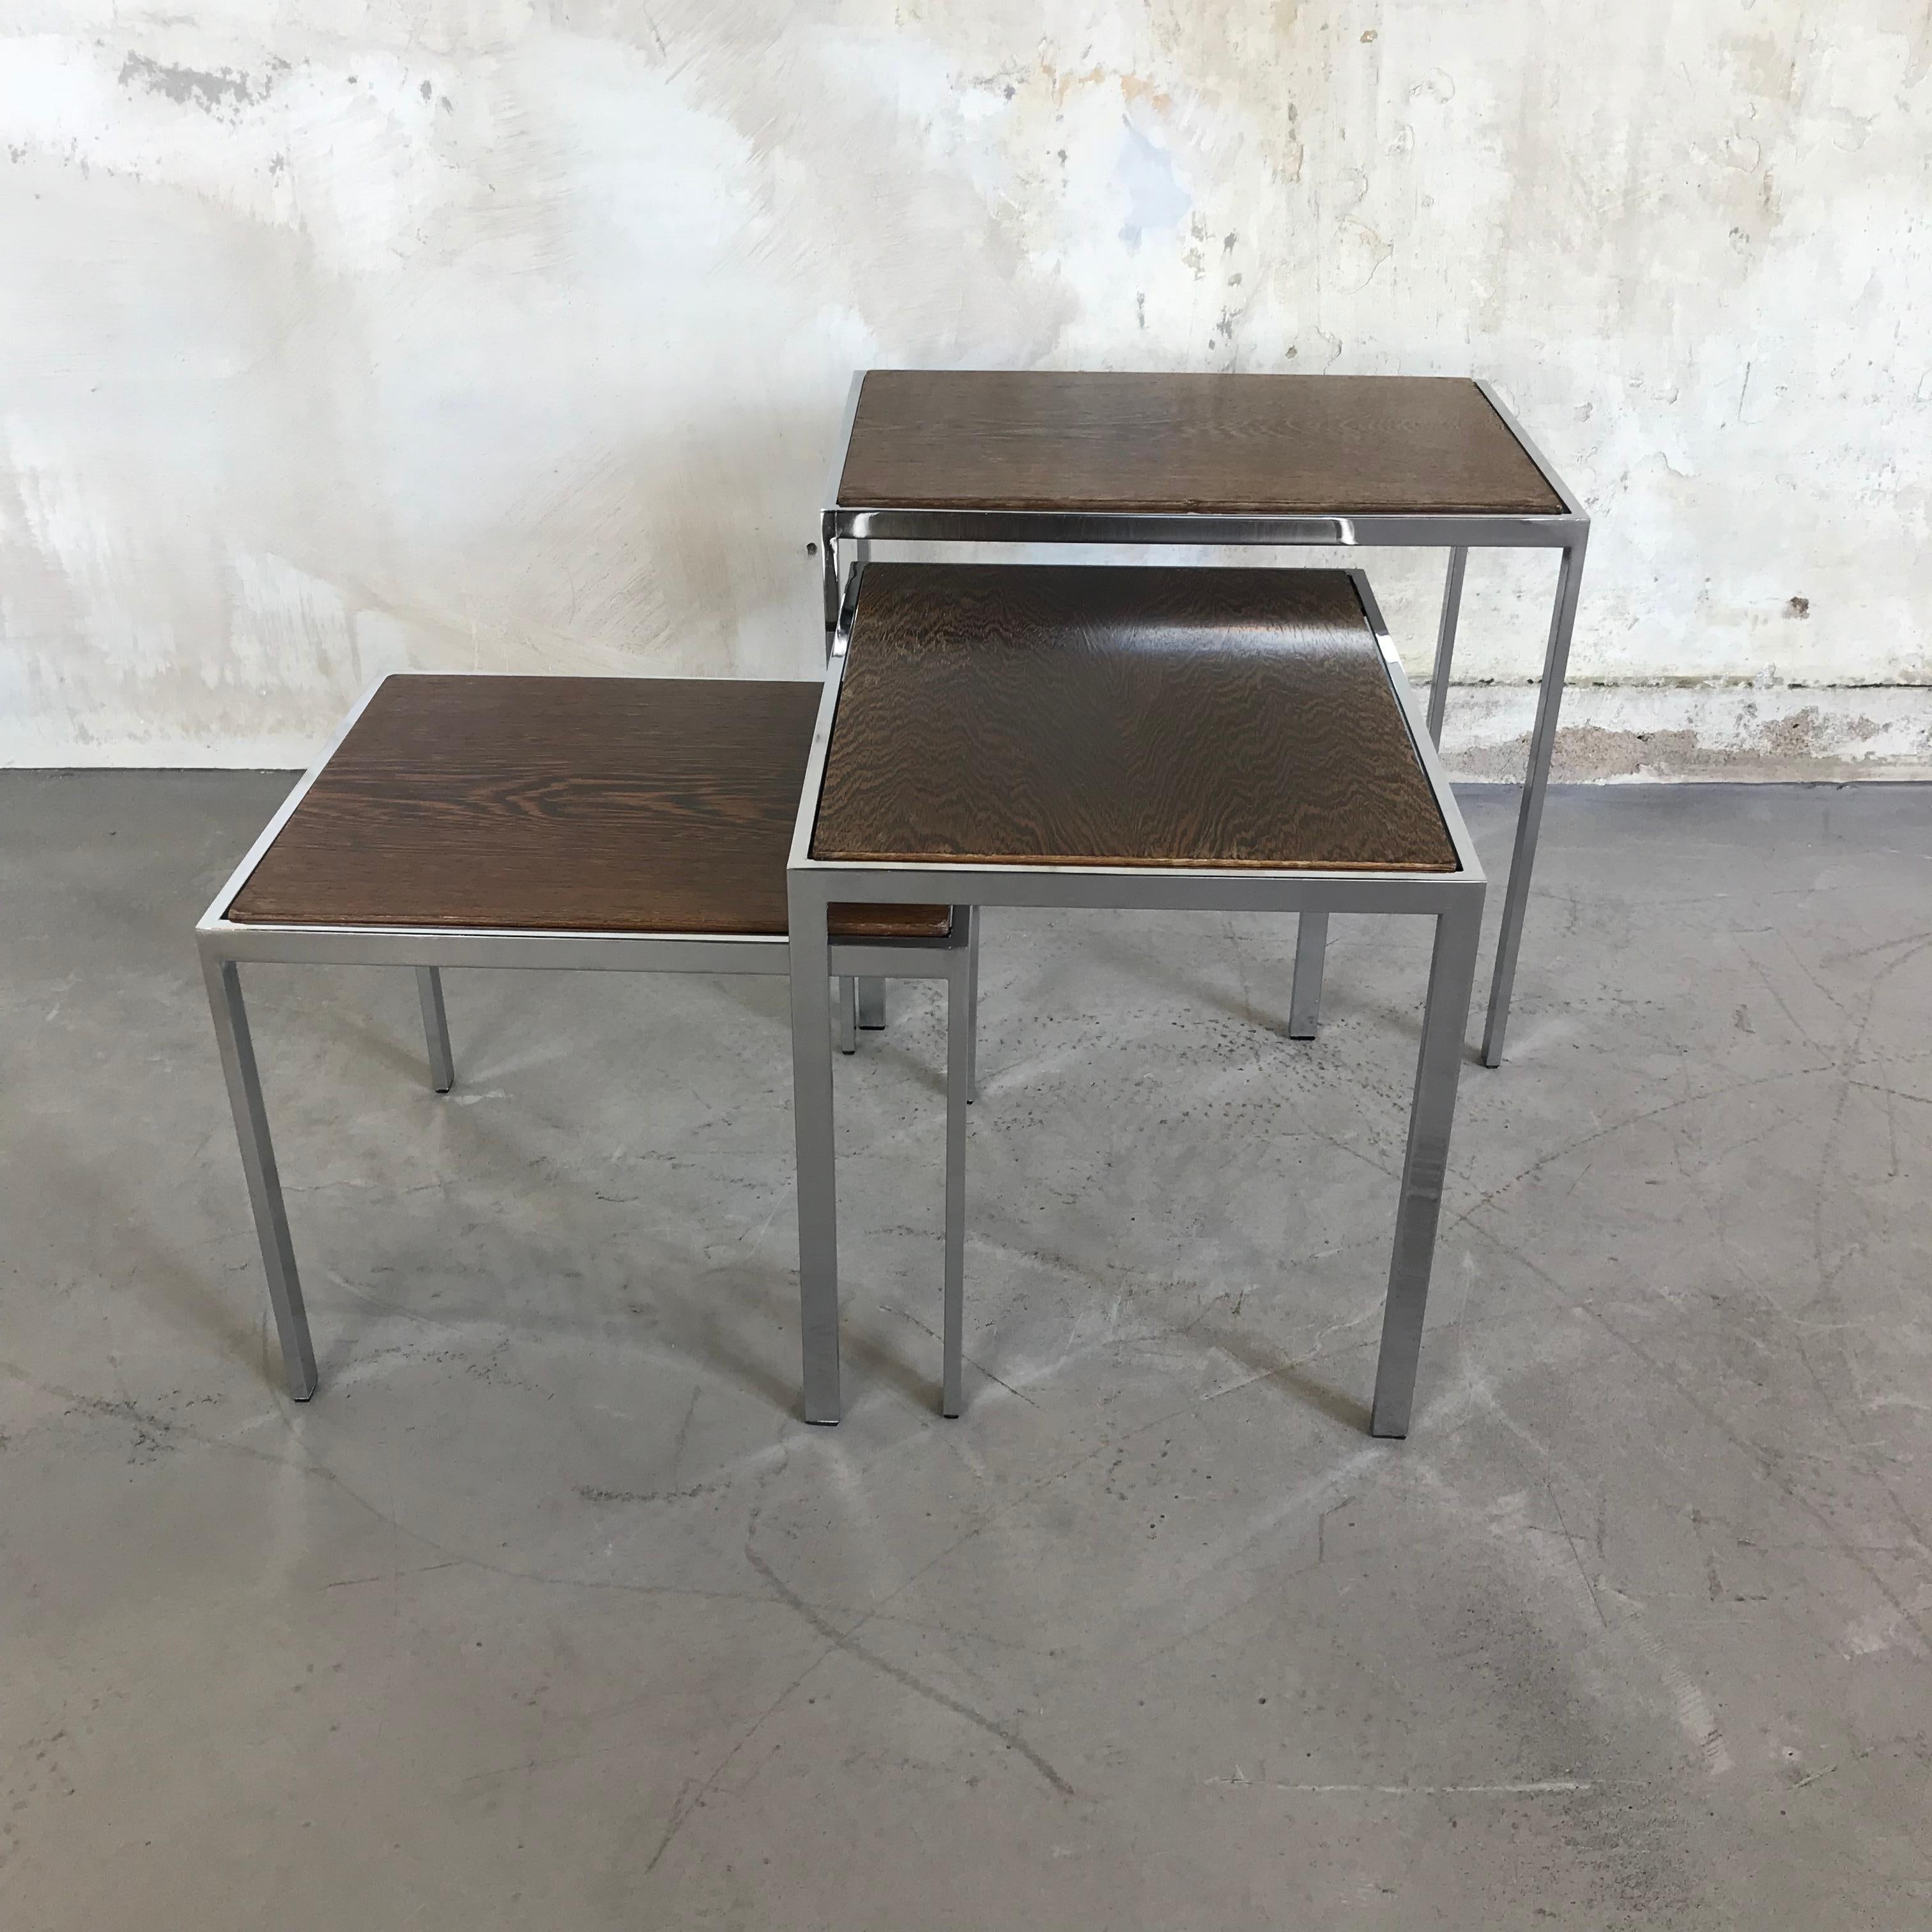 Beautiful set of 3 rosewood and chrome nesting tables. The tops are two-sided with white Formica on one side and rosewood veneer on the other. Chrome plated base. Good vintage condition with little signs of age and use.

Measures: Large 50 x 35